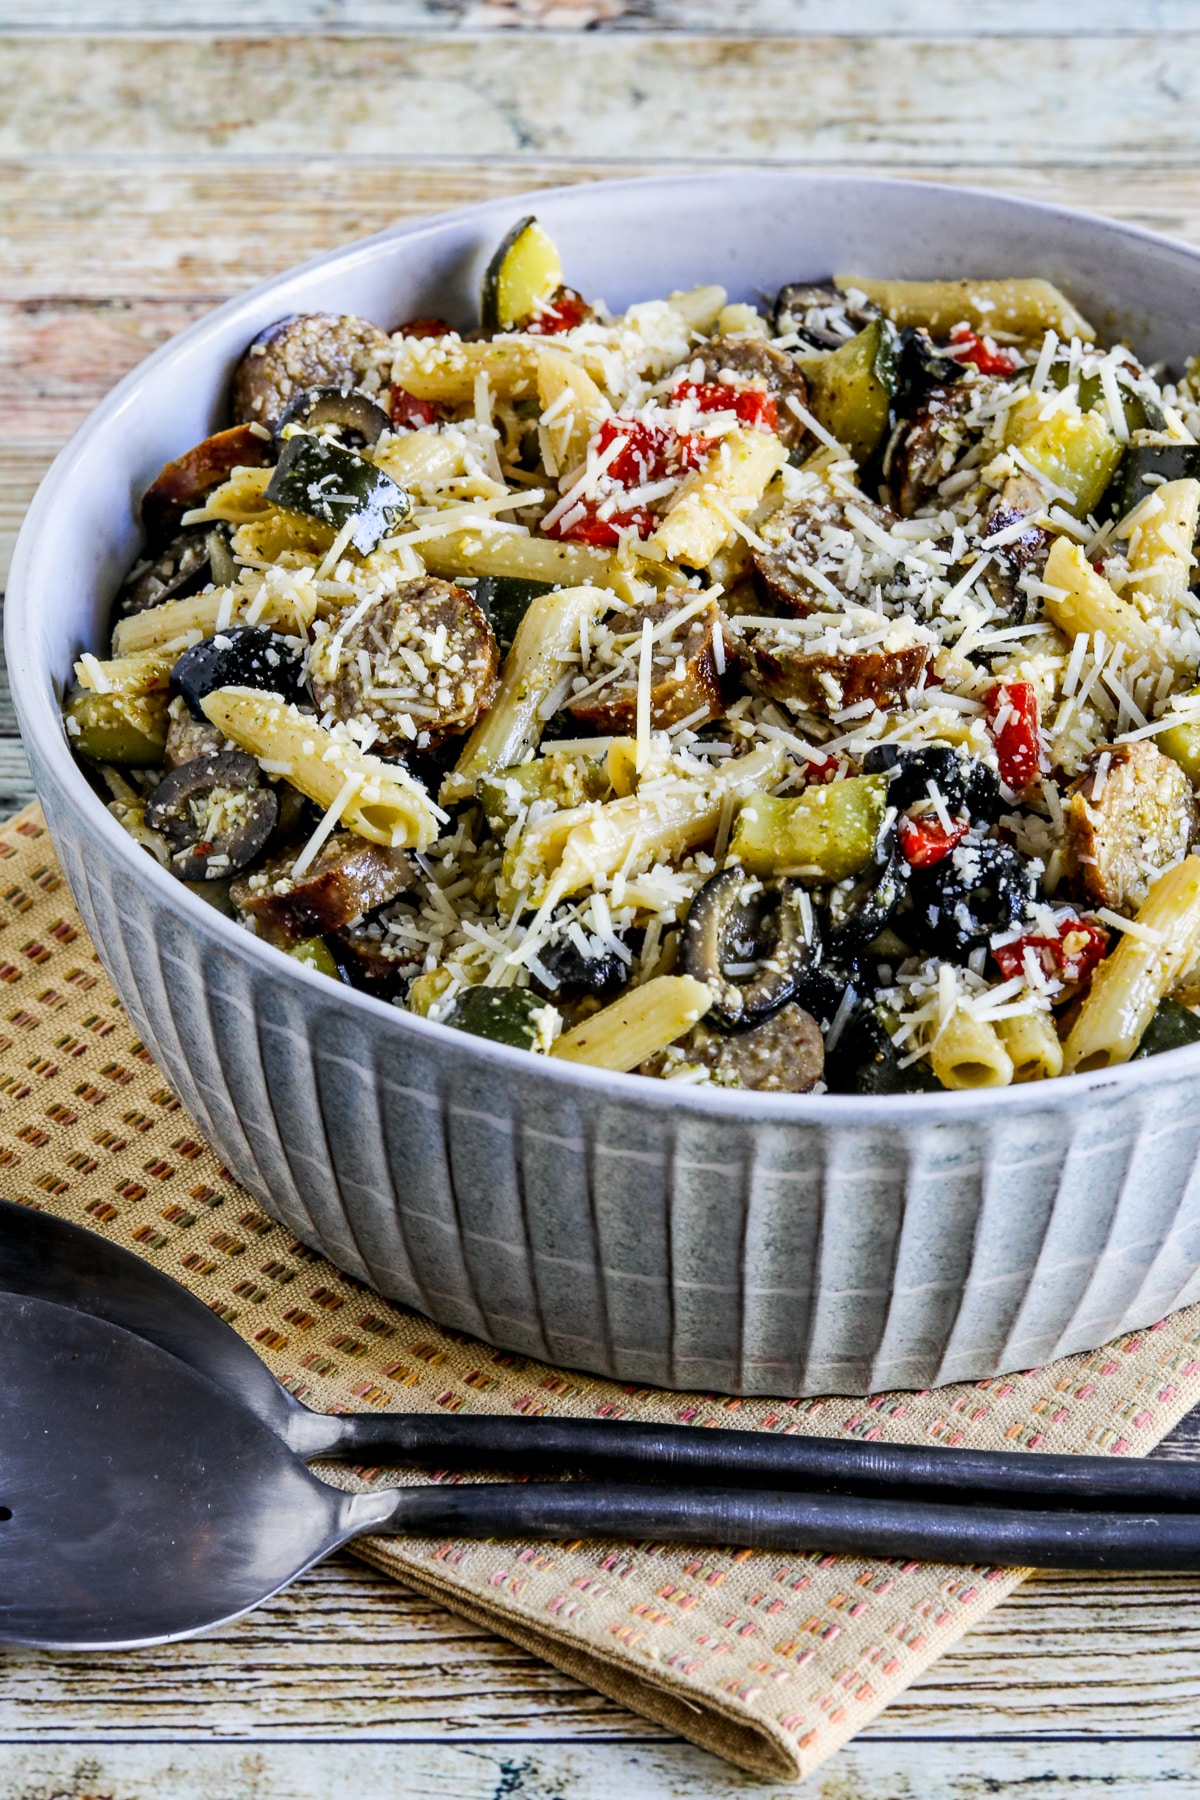 Pasta salad with sausage, zucchini, olives and peppers shown in a serving bowl on a napkin.